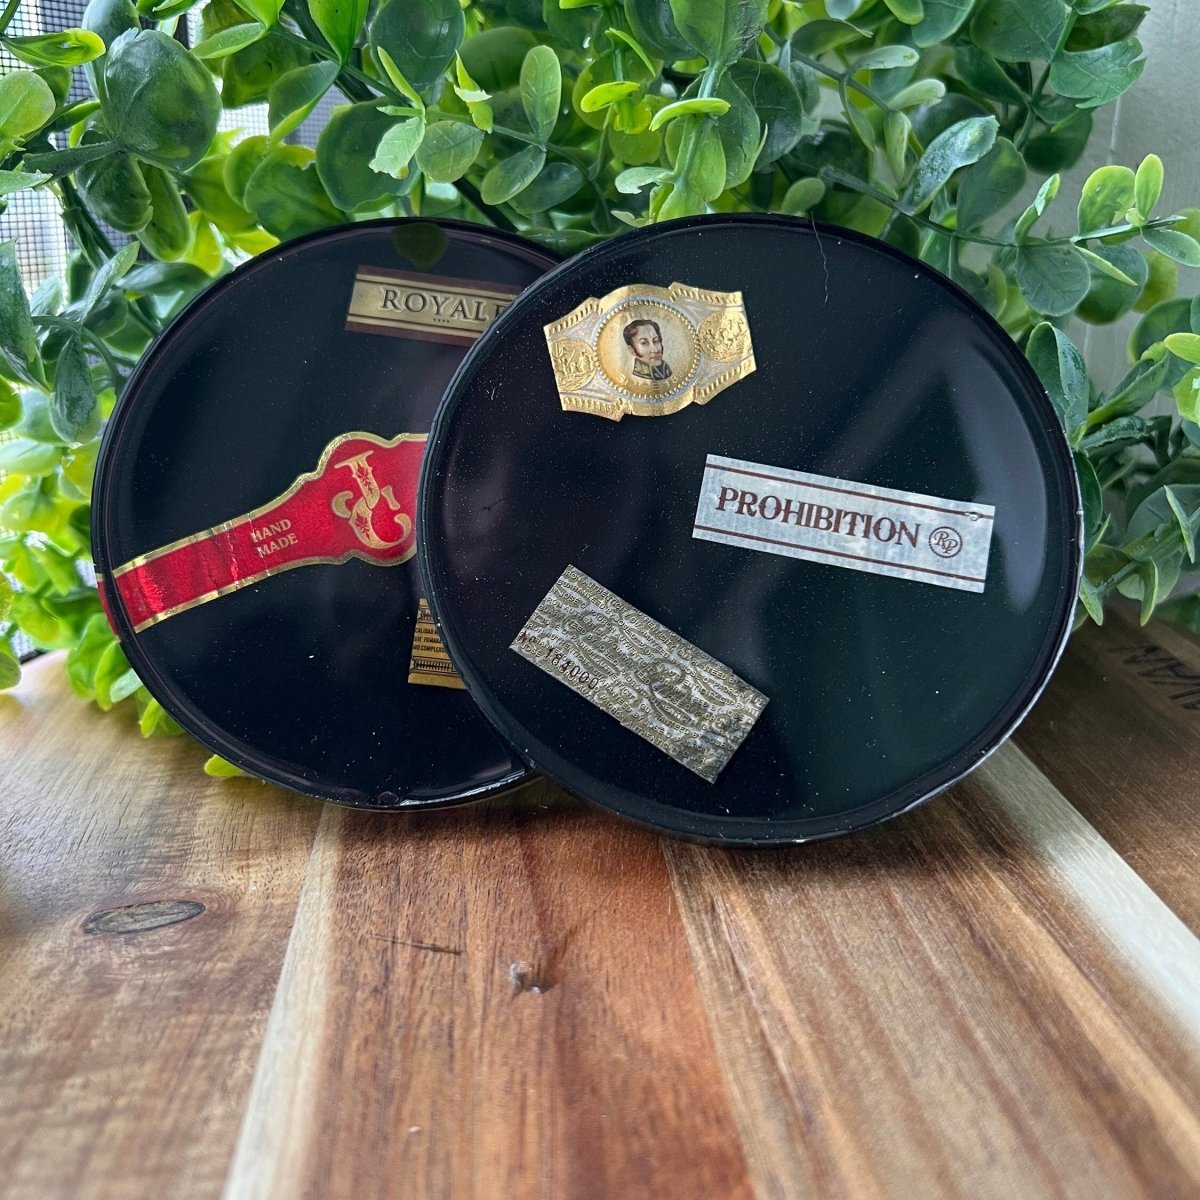 Black Cigar Coaster - Up In Arms